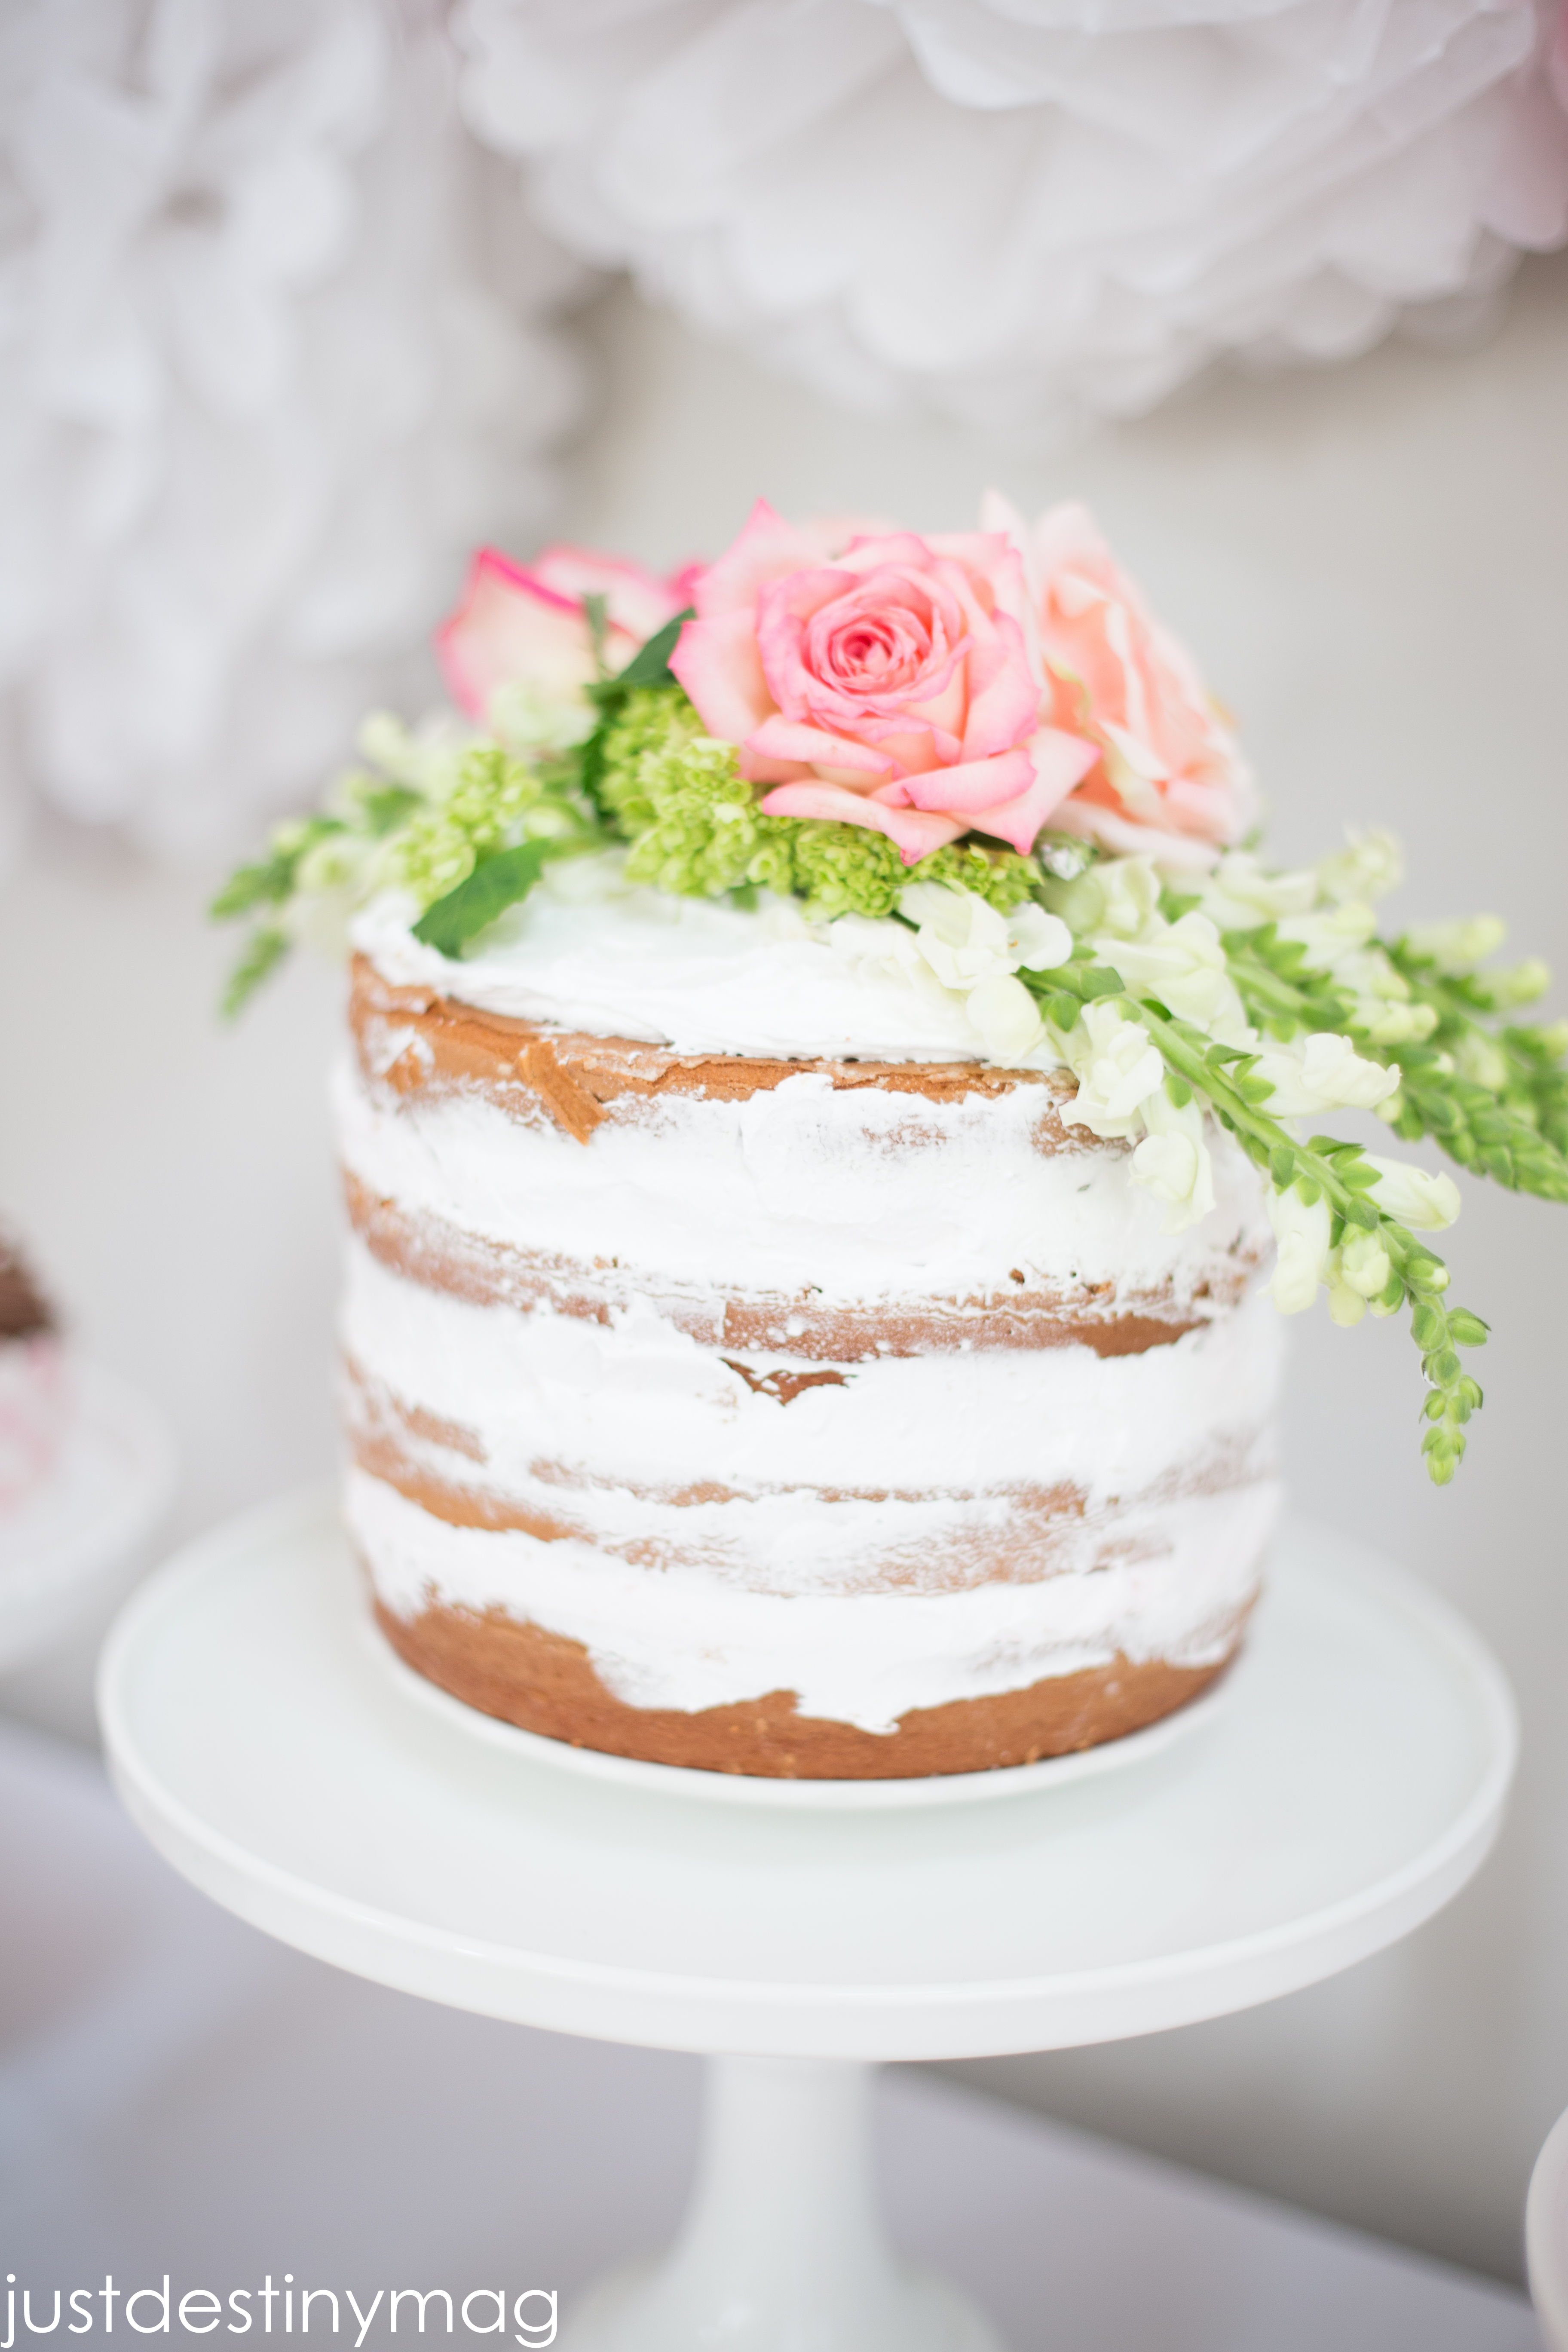 Some Beautiful Naked Cake ideas for your next party